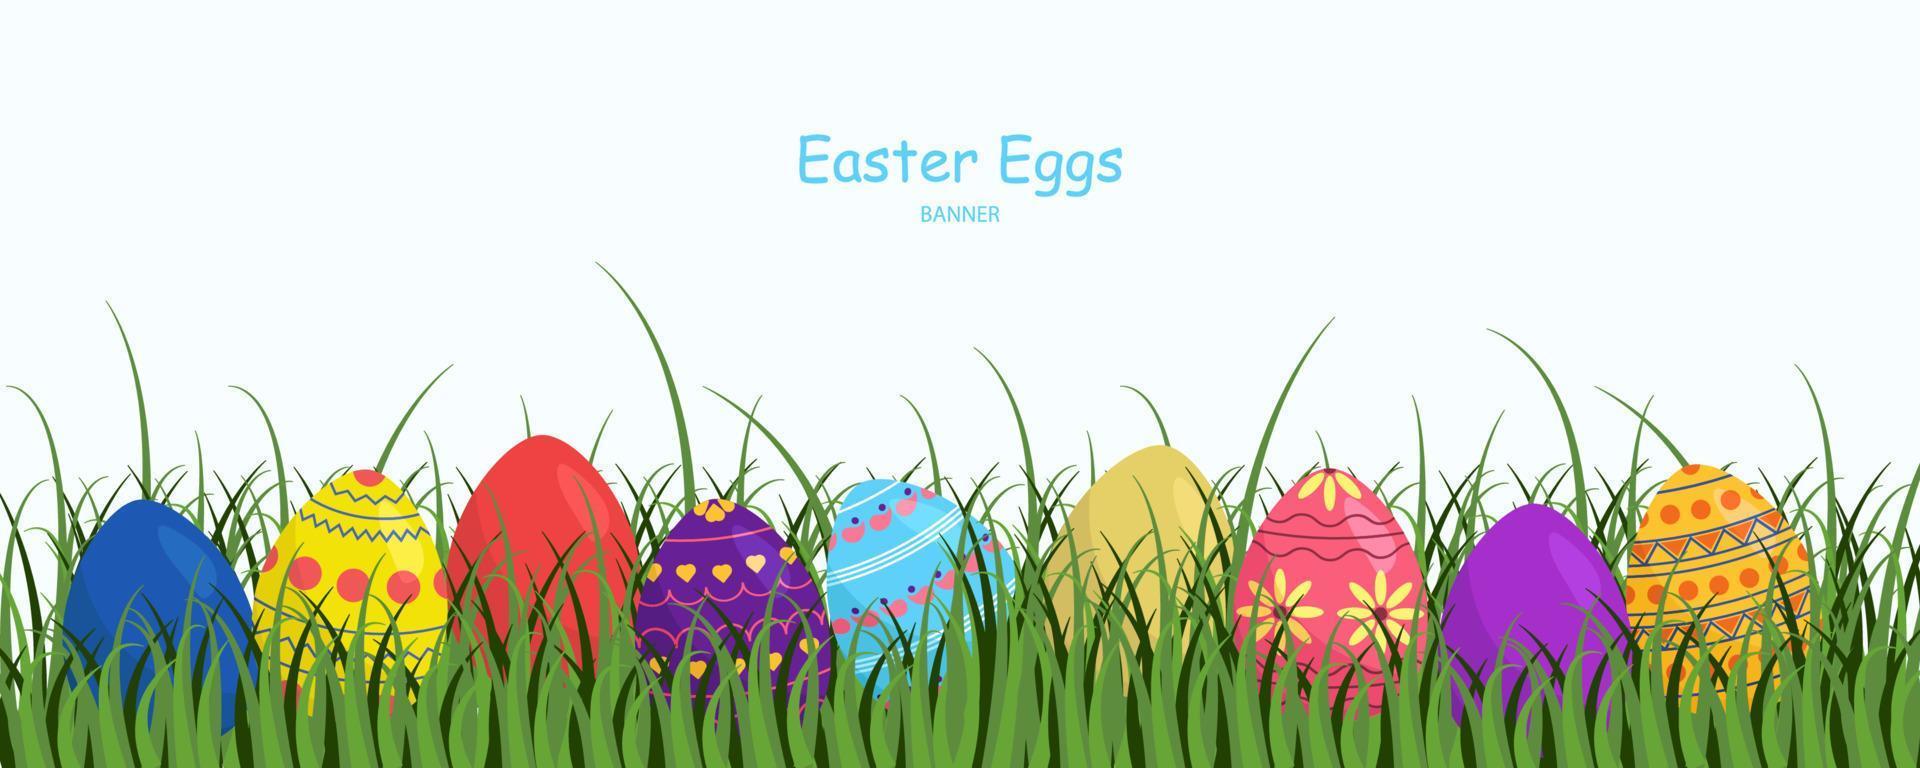 Set of Vector Easter Eggs in a Grass